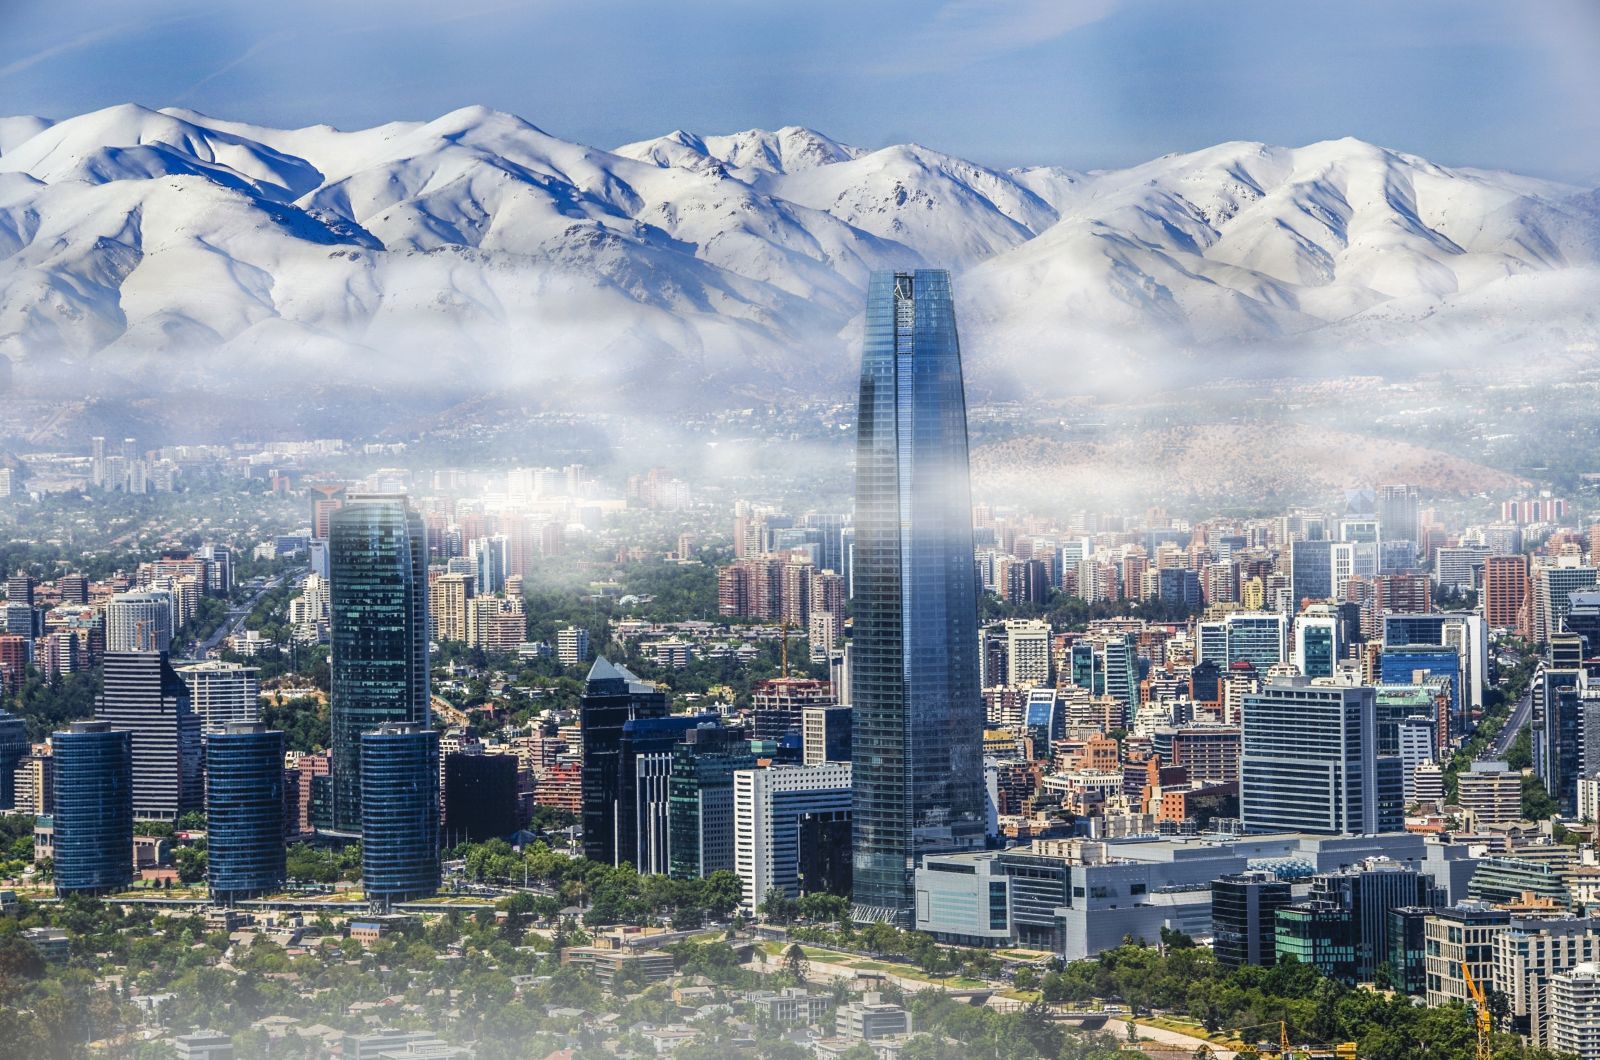 The skyline of Santiago de Chile with snow-capped mountains in the background